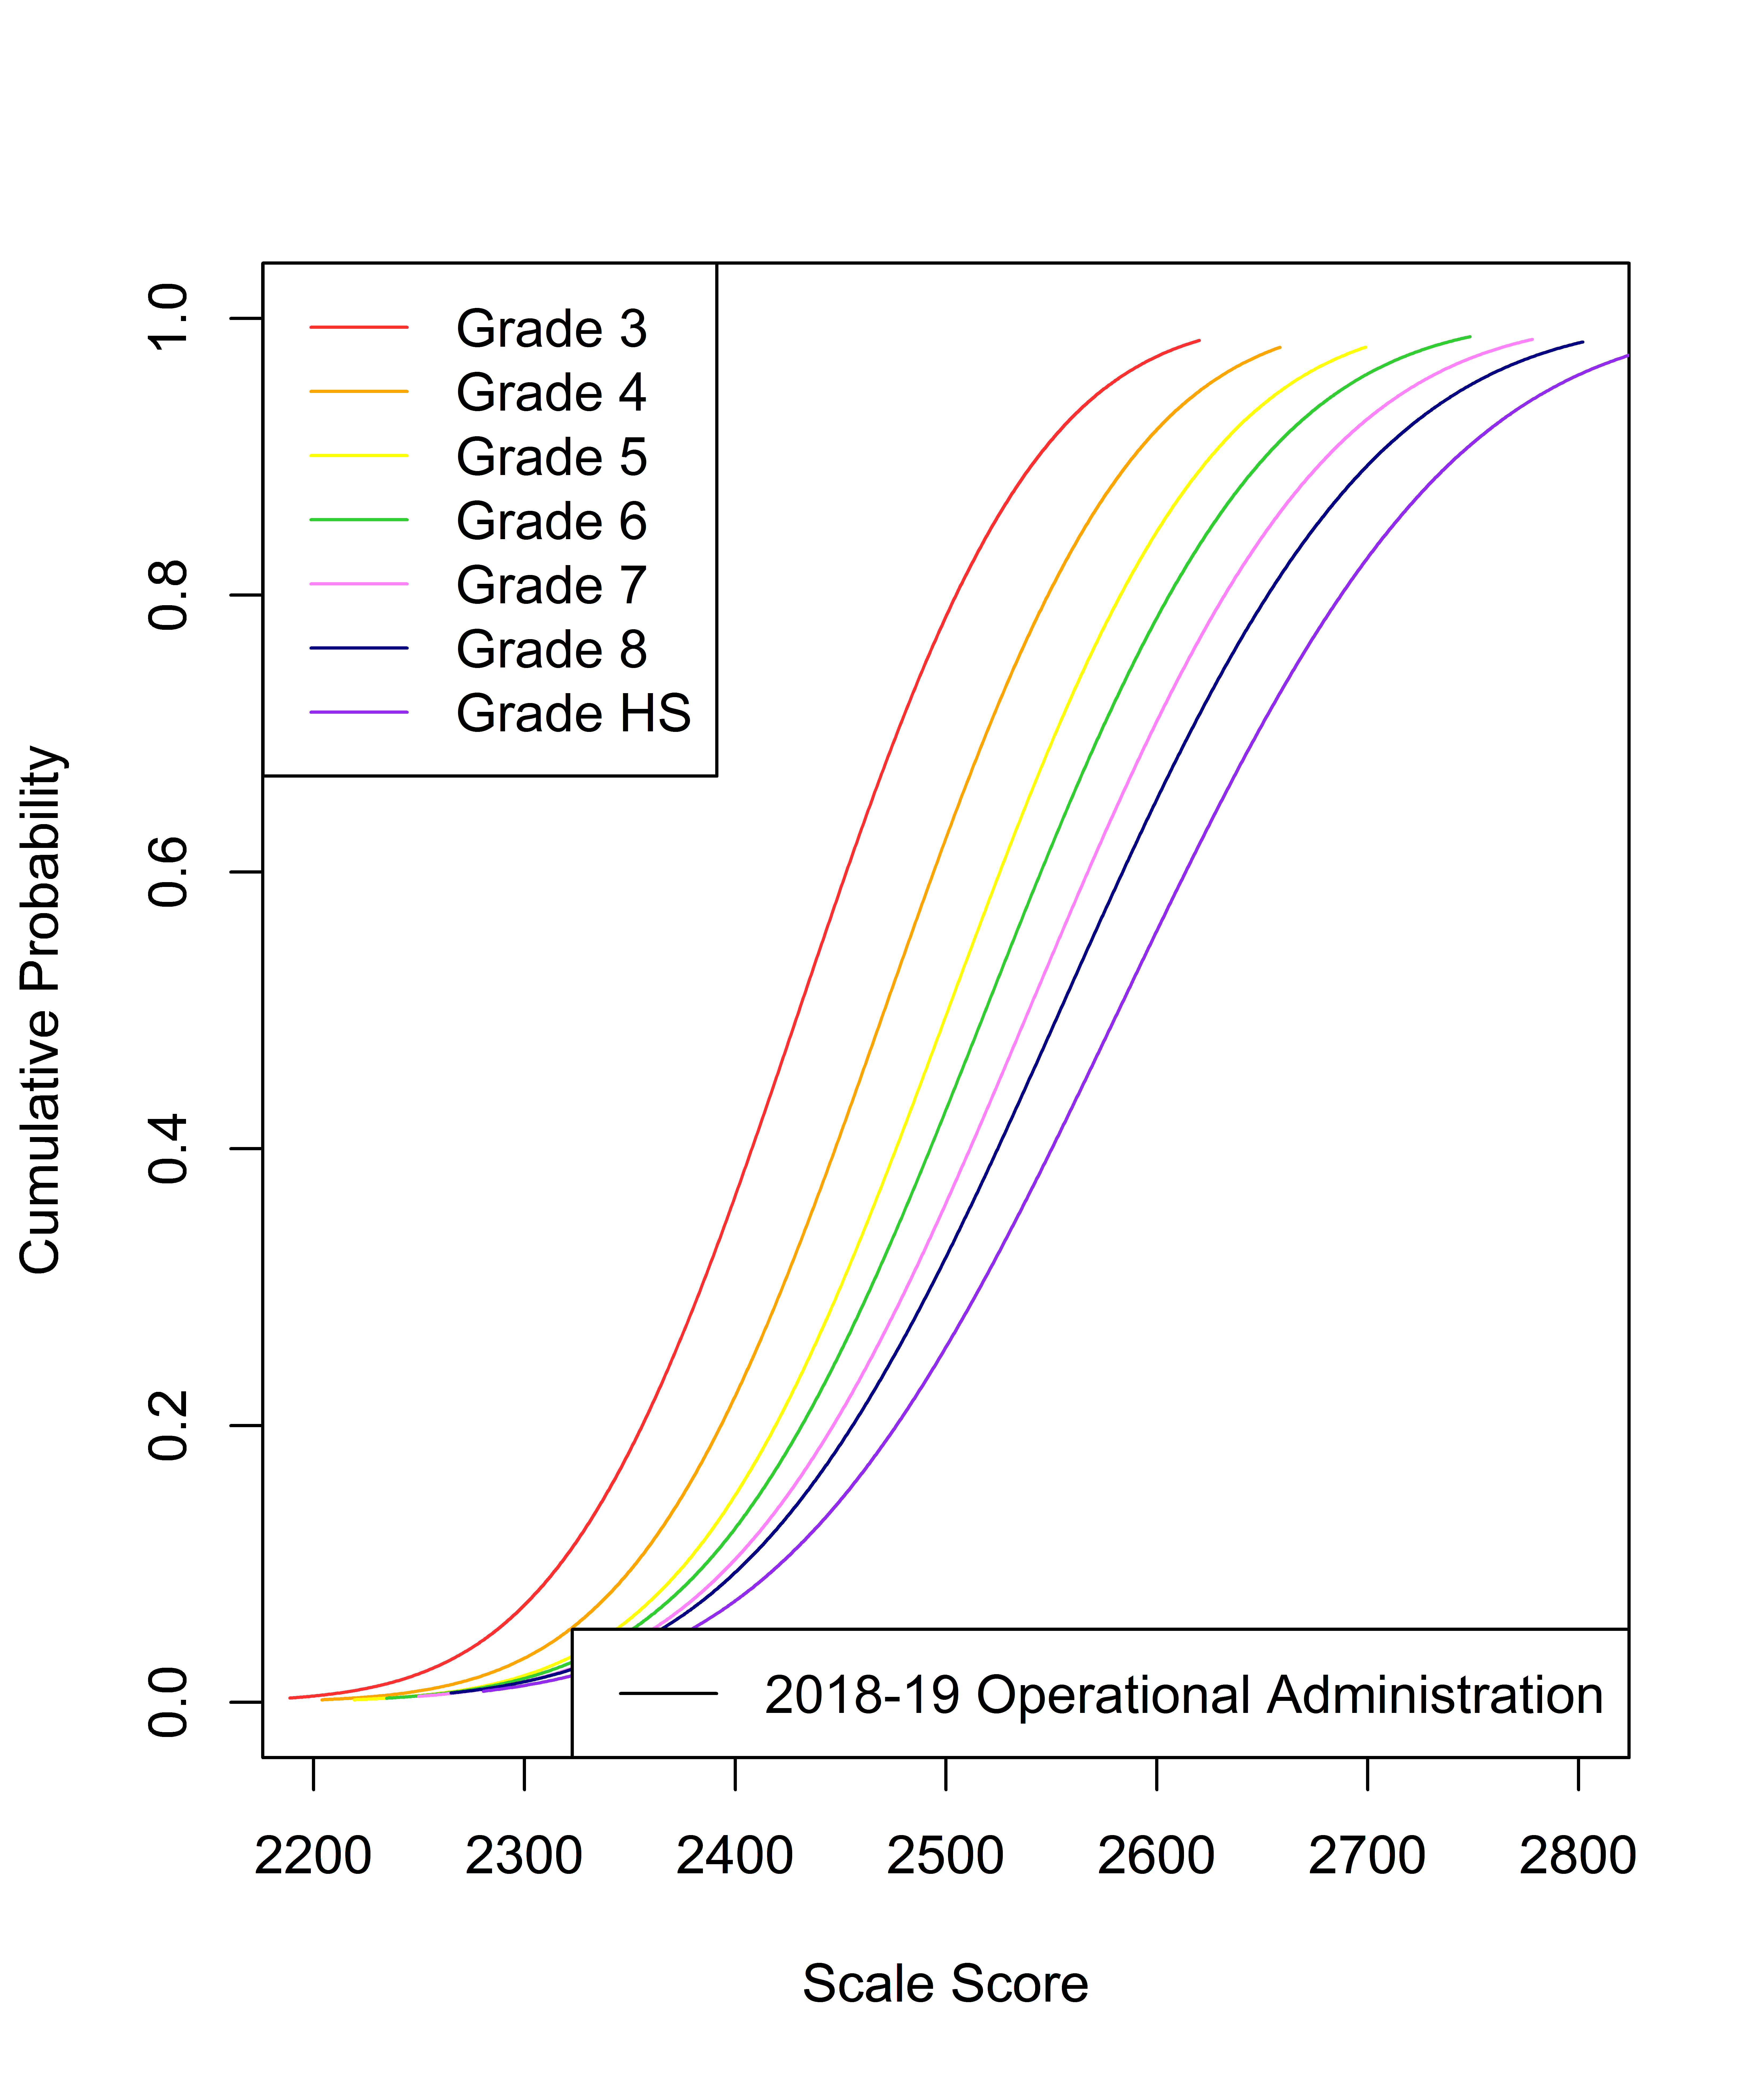 Test Characteristic Curves for Vertically Scaled Tests (Math)